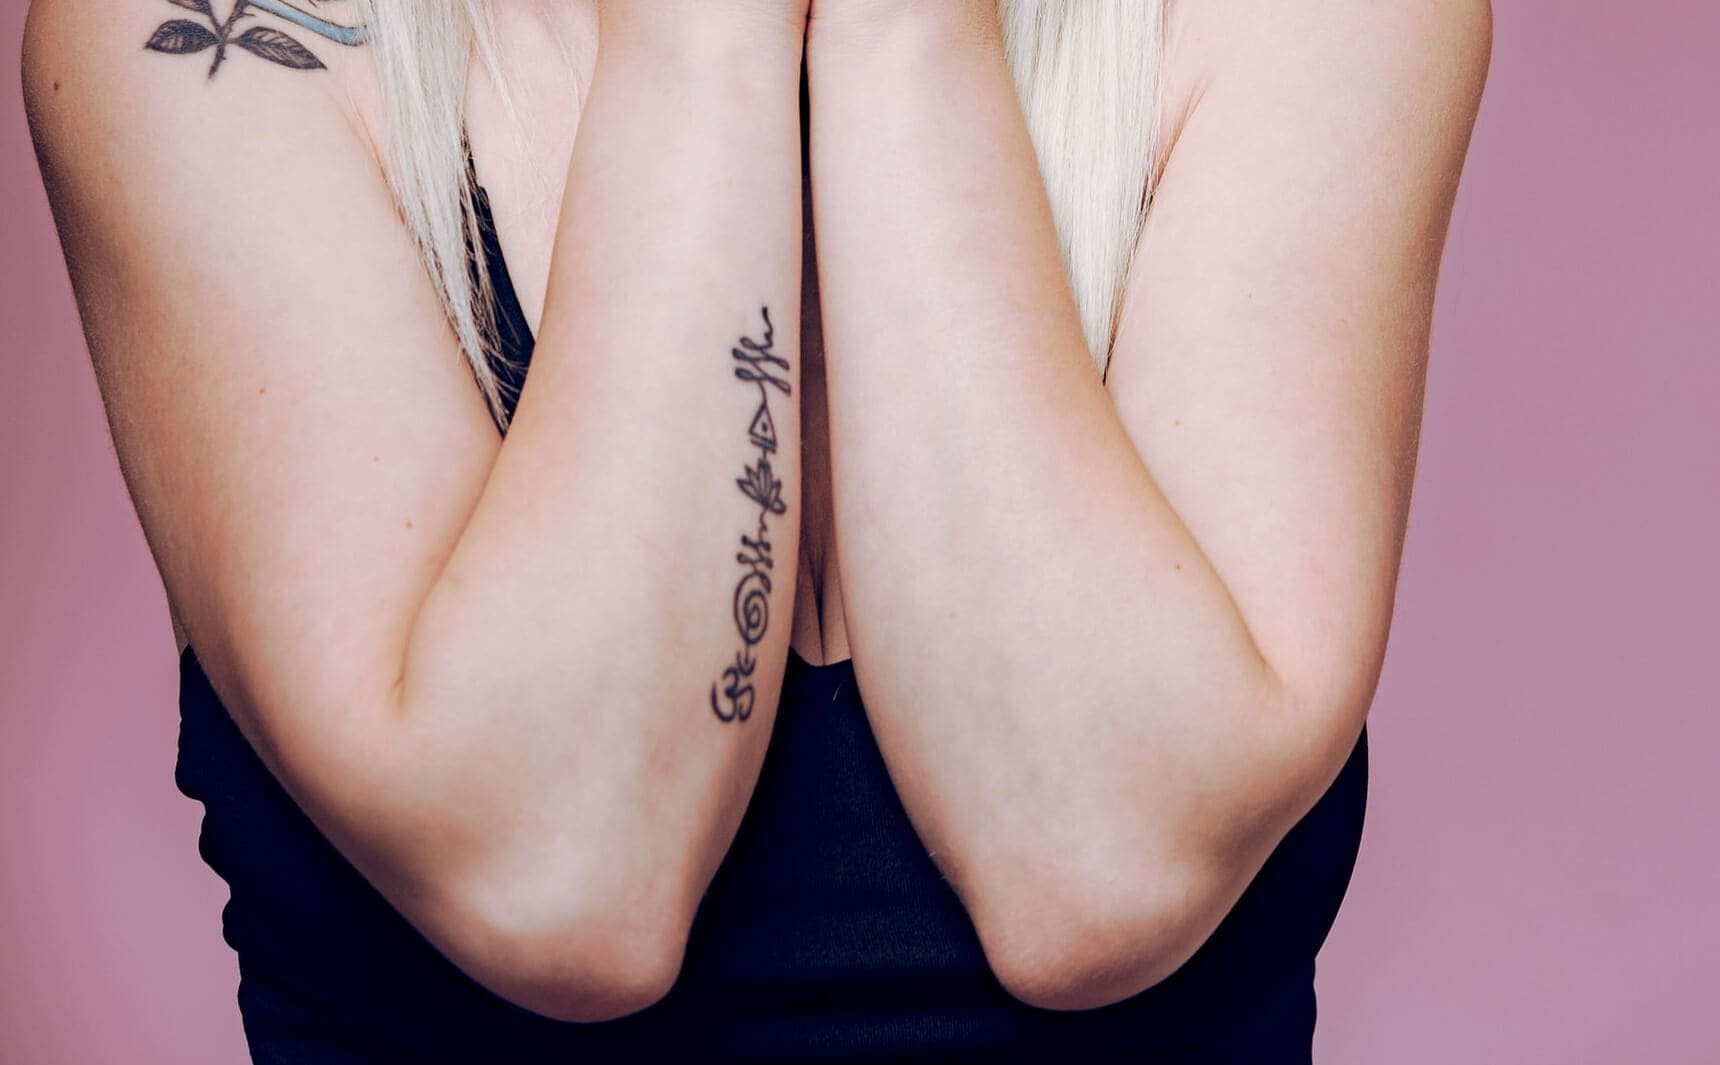 unalome tattoo a meaningful tattoo for women